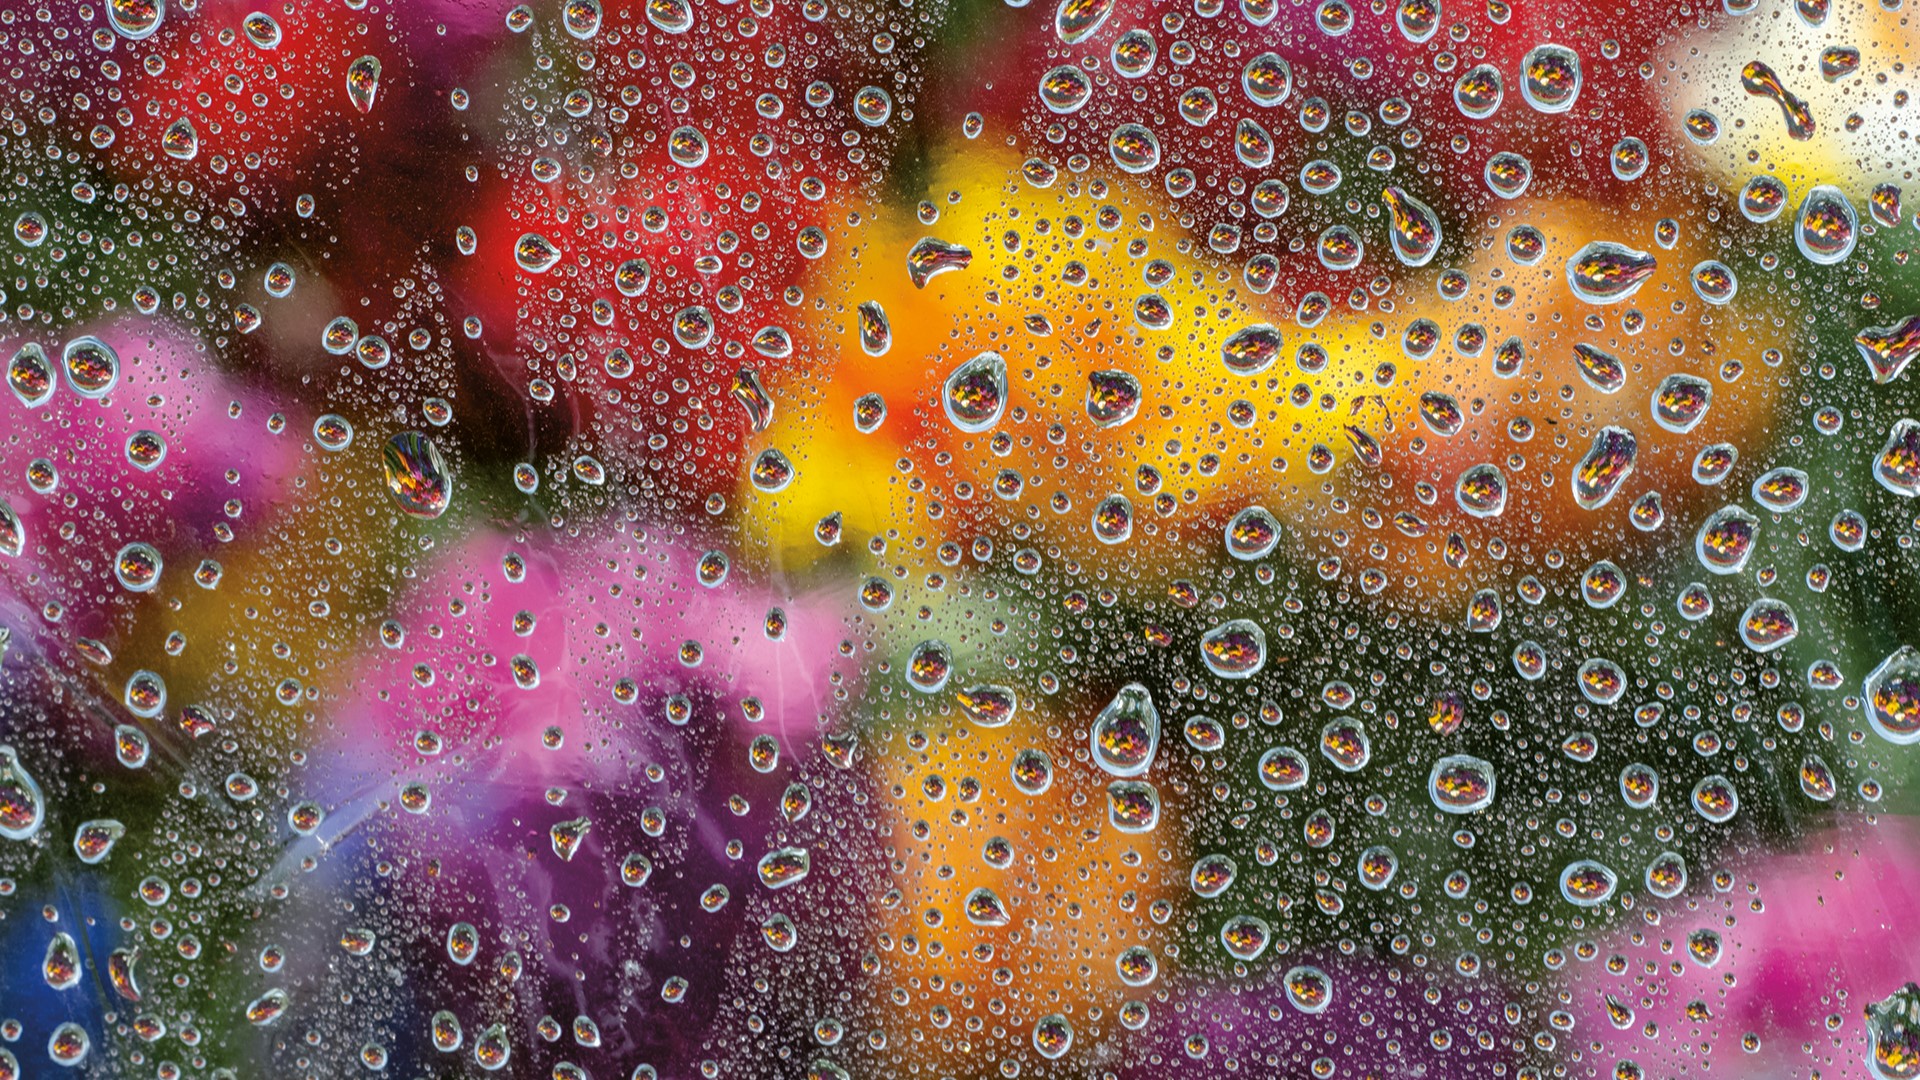 Robin Layton's new photography book "rain" contains 146 pictures of droplets, puddles, reflections and other images celebrating wet weather. #k5evening